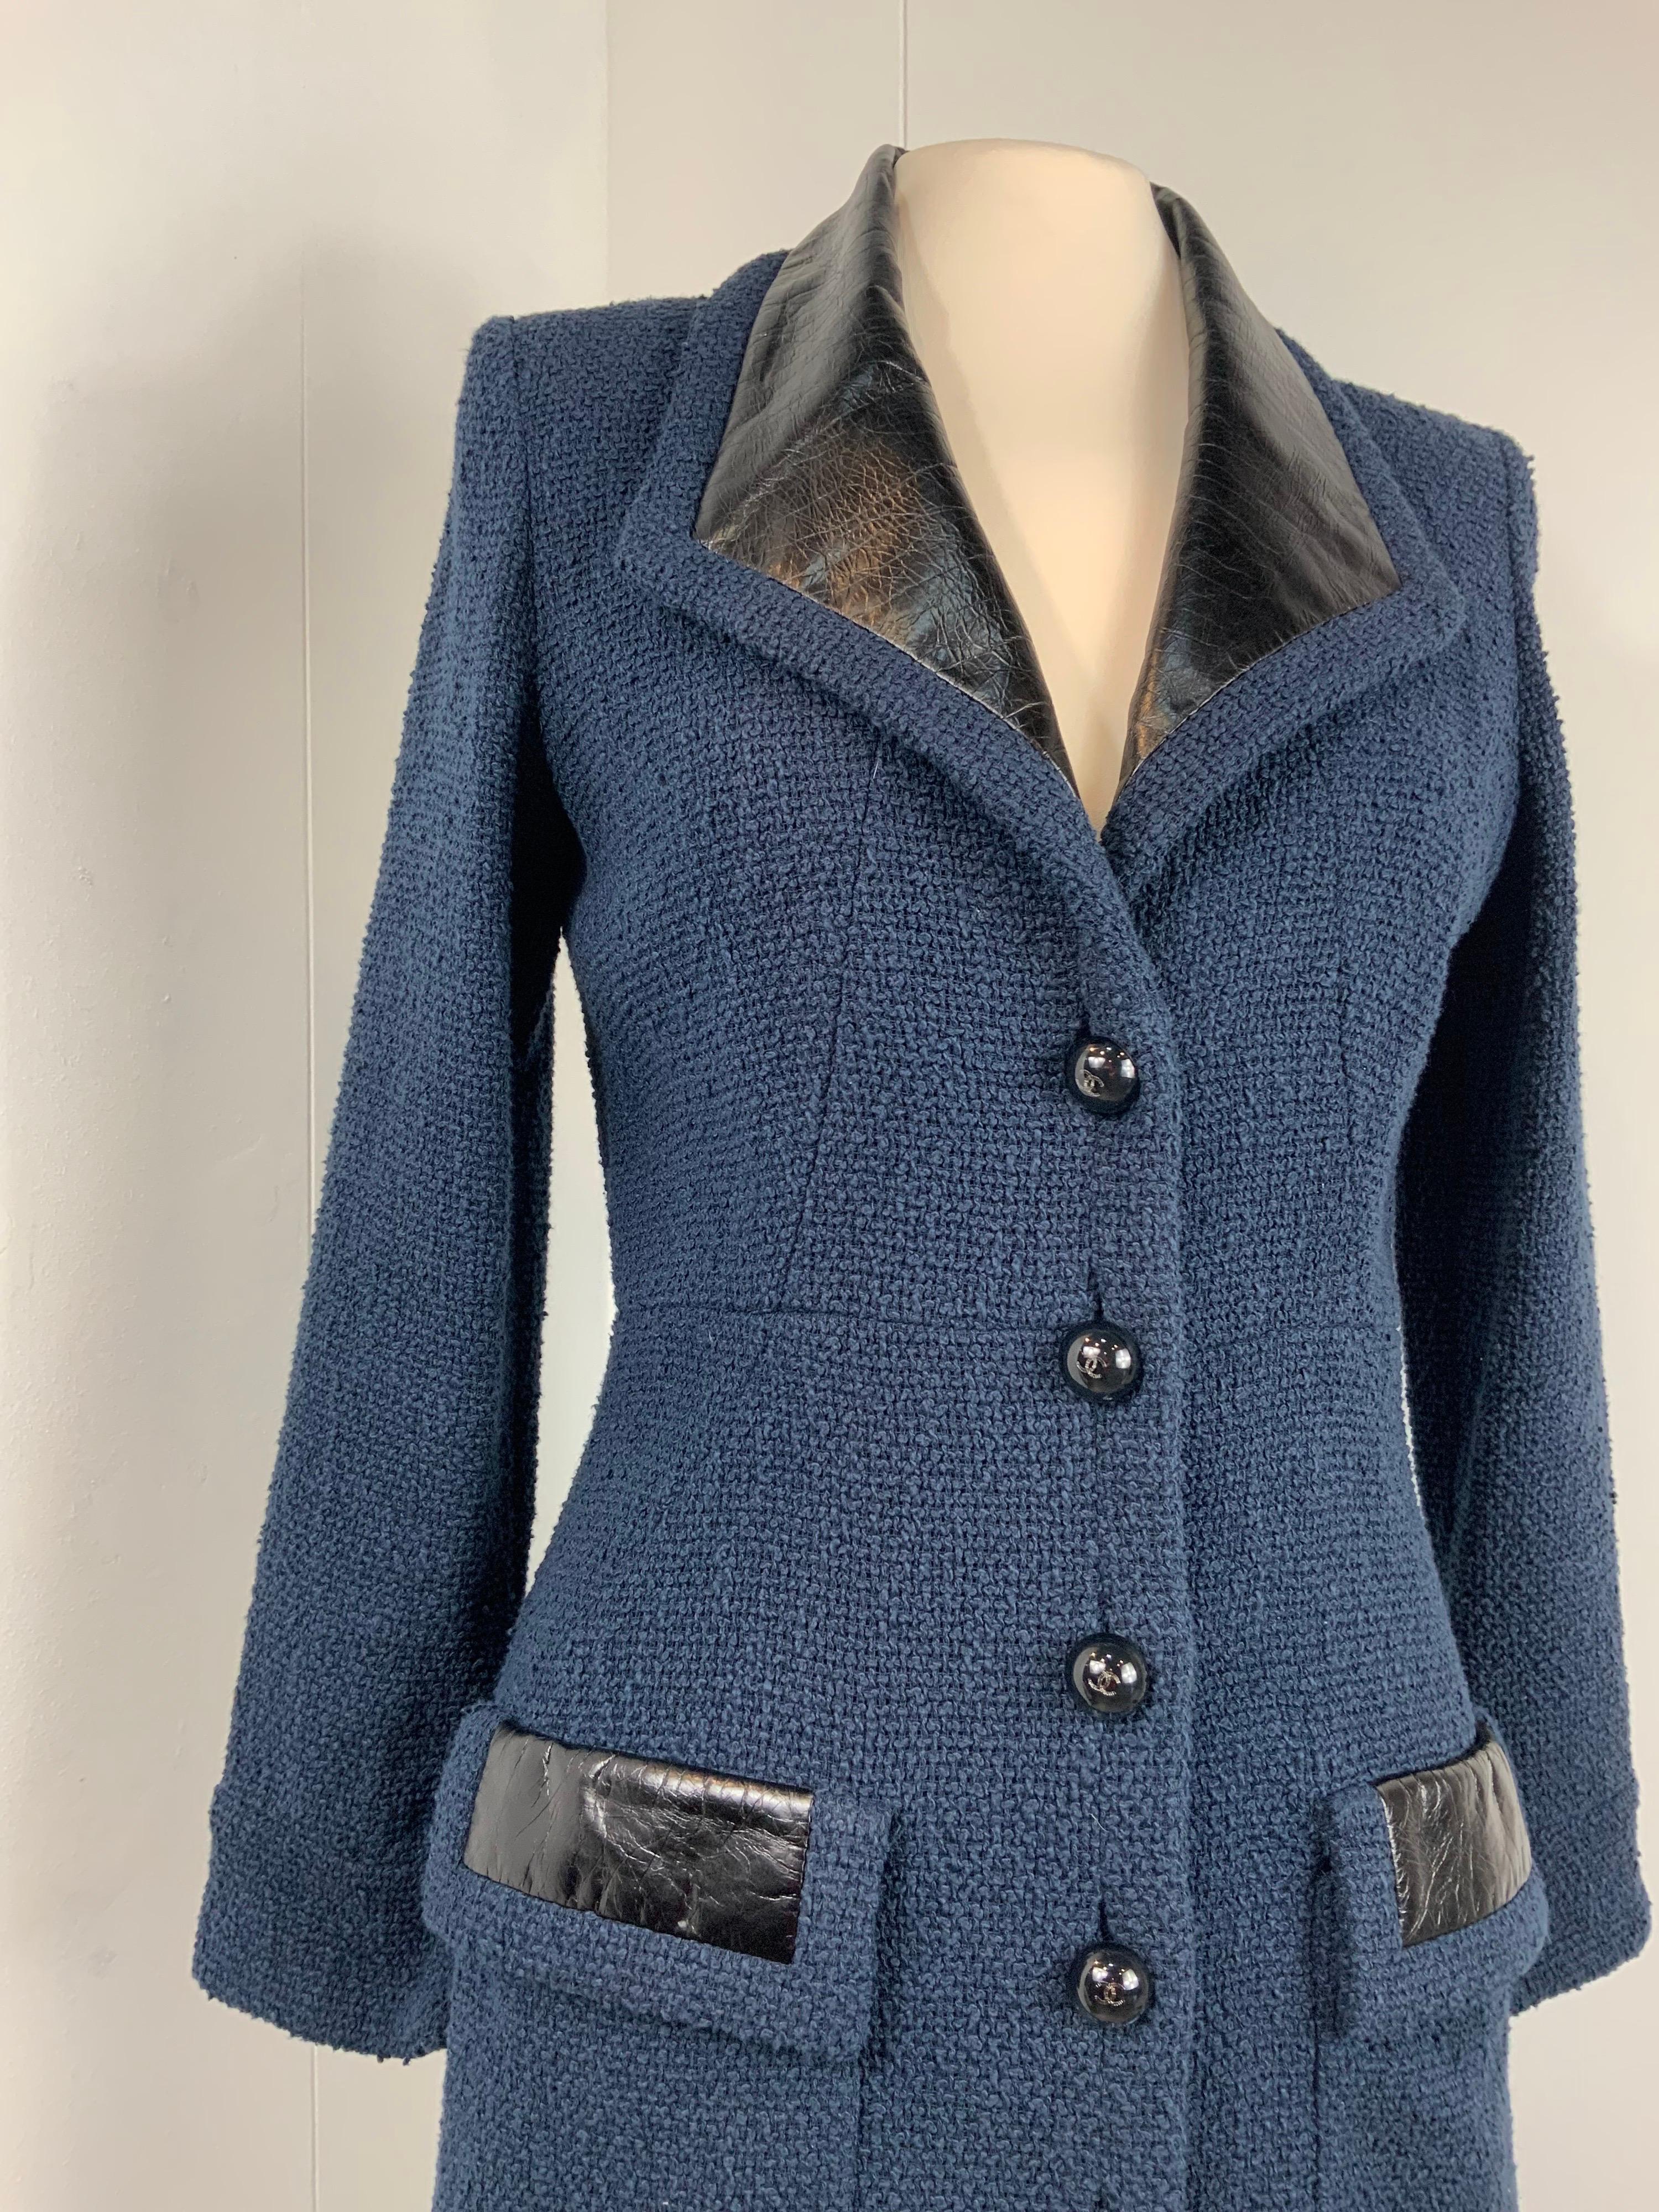 Chanel Coat. 
In cotton and polyamide.
Lining in silk. Leather details.
The size tag is missing but it fits a 40 Italian.
Measurements:
Shoulders 40 cm
Bust 40 cm
Length 95 cm
Sleeves 56 cm 
Conditions: Good - Previously owned and gently worn, with